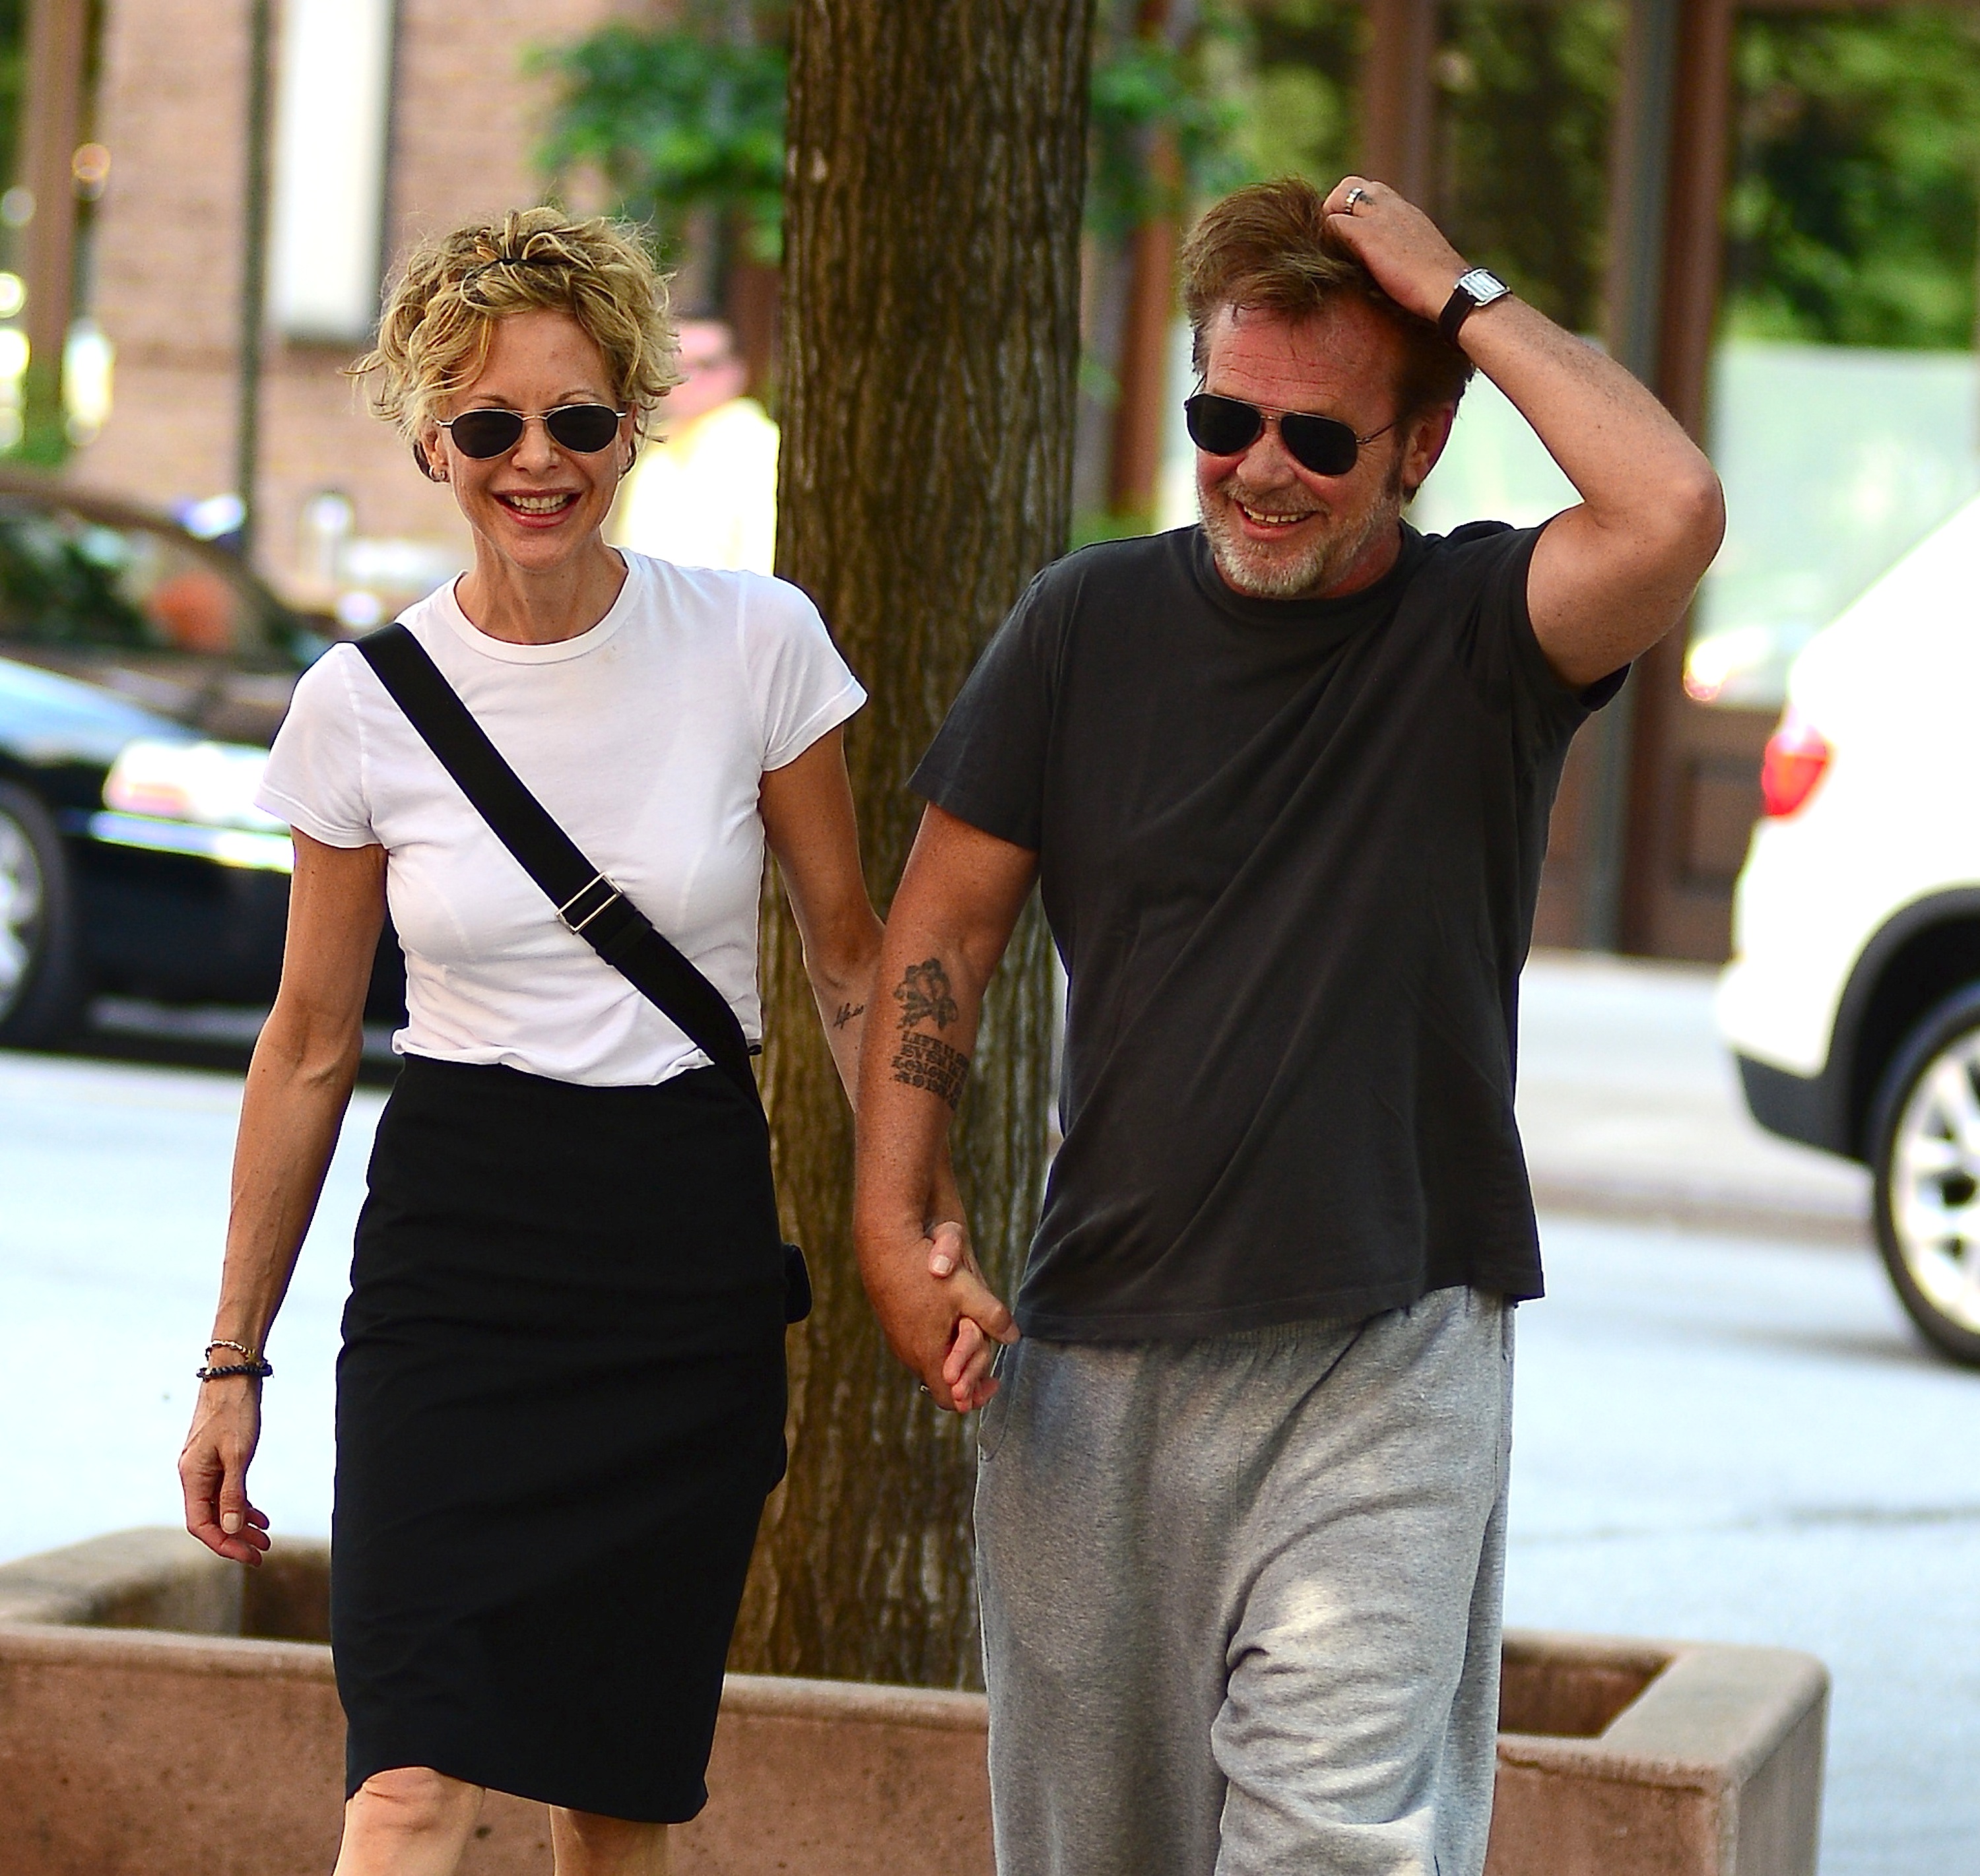 Meg Ryan and John Mellencamp seen in Tribeca on June 24, 2013, in New York City | Source: Getty Images